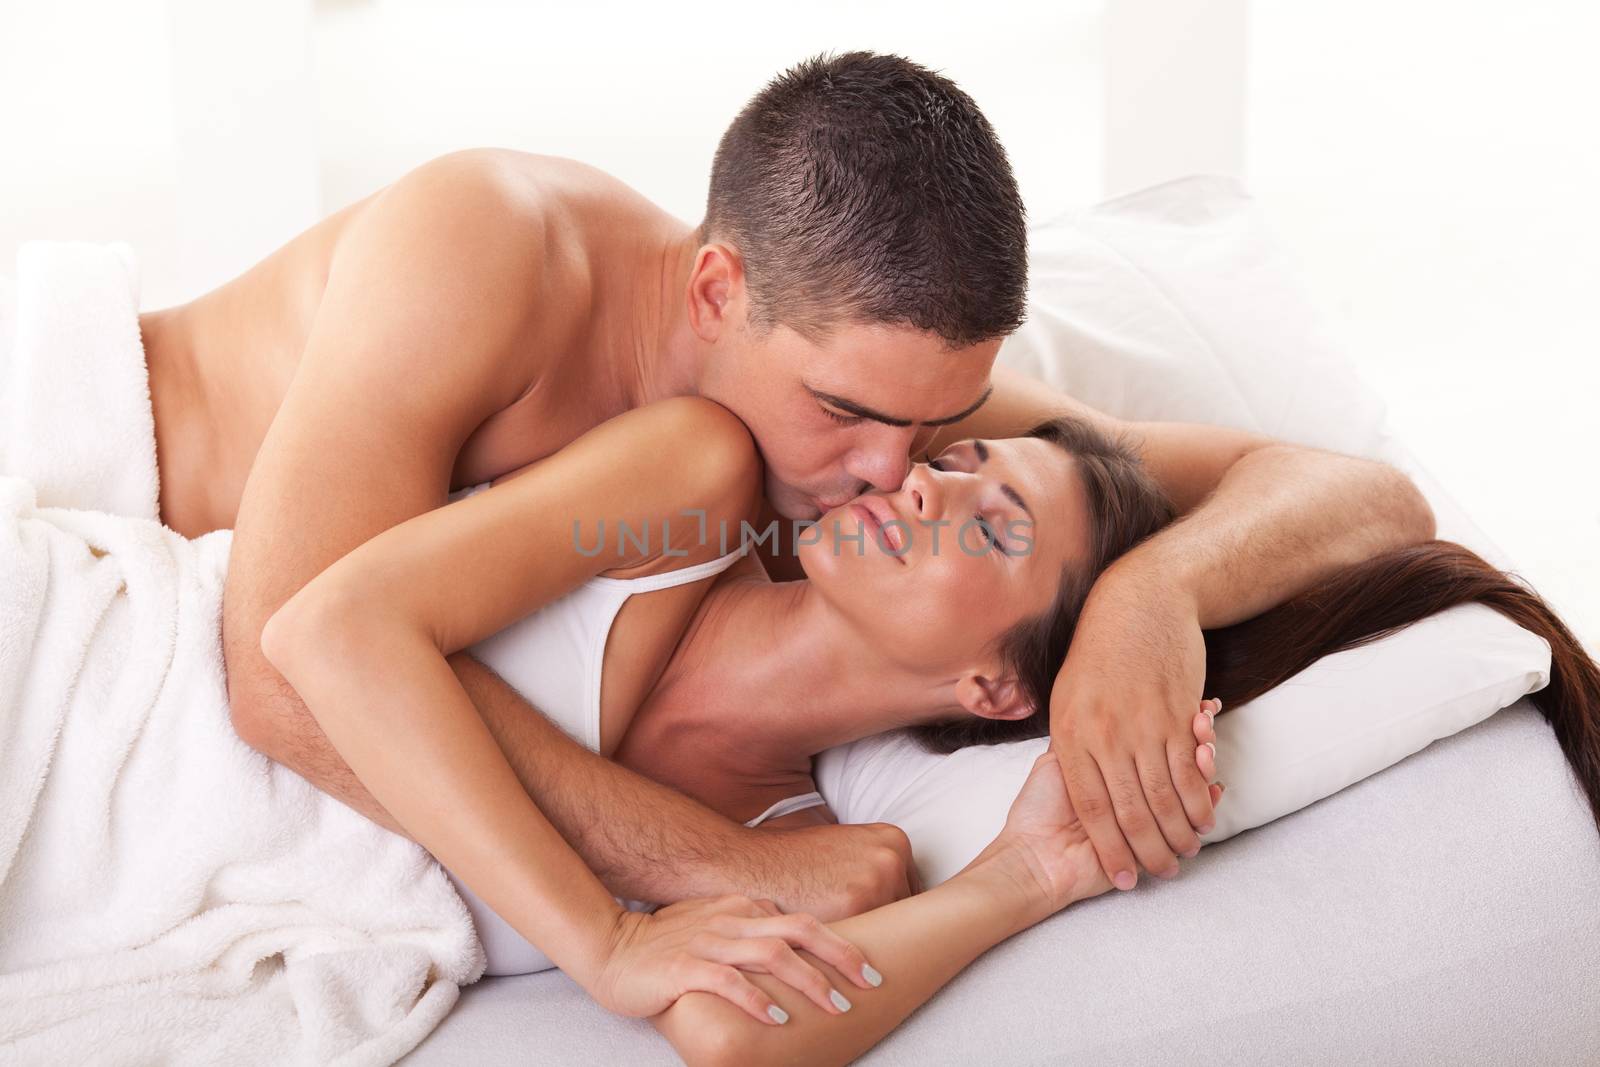 Young man kissing his girlfriend for a good morning.